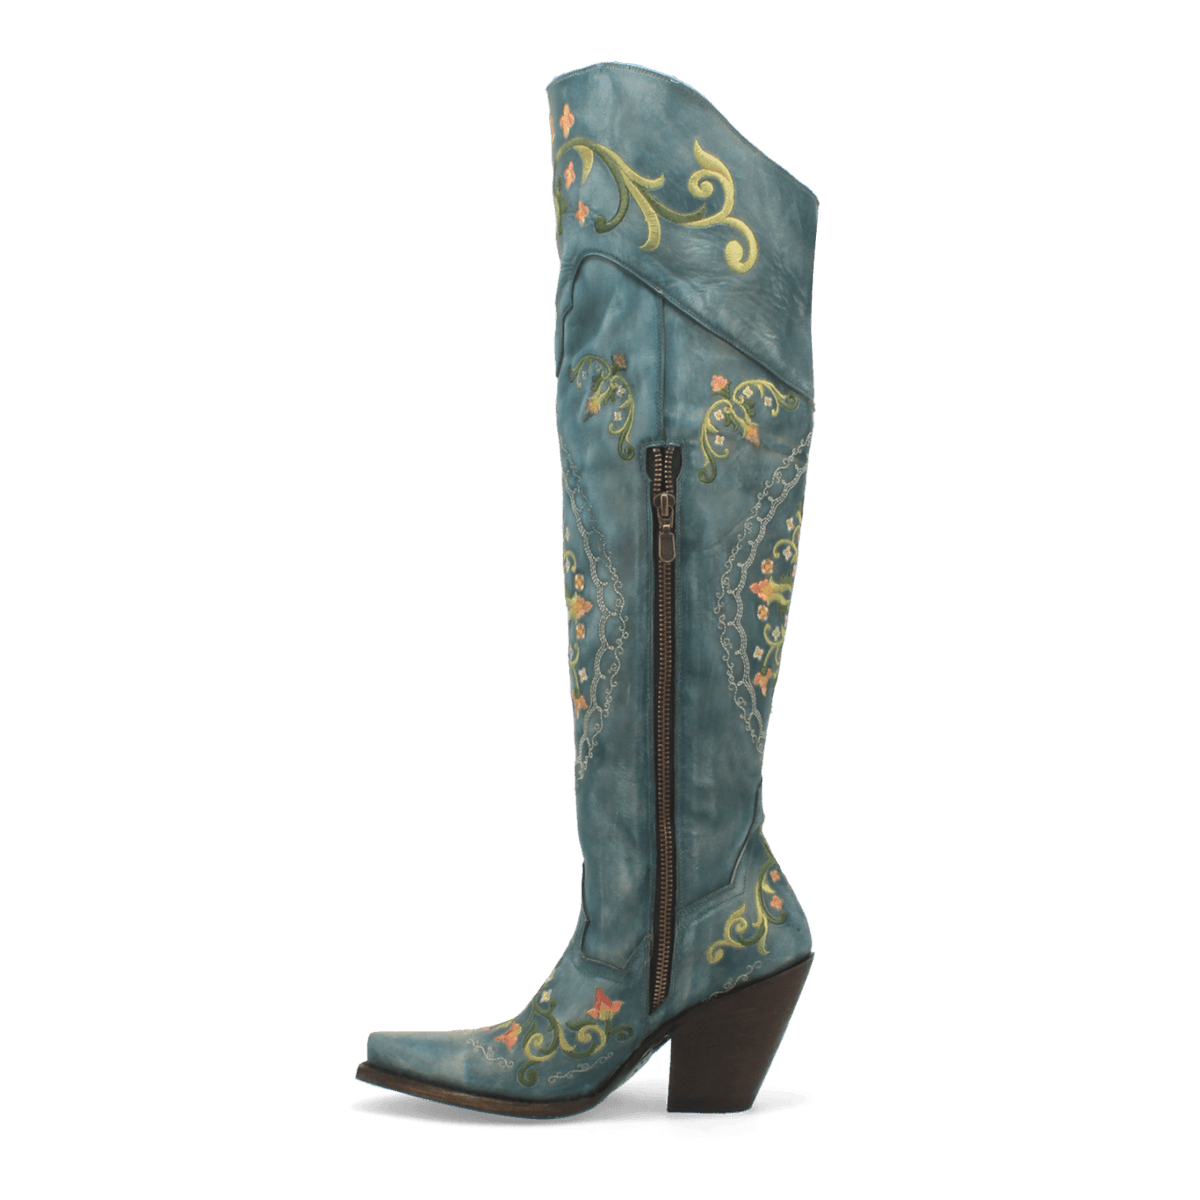 FLOWER CHILD LEATHER BOOT Image